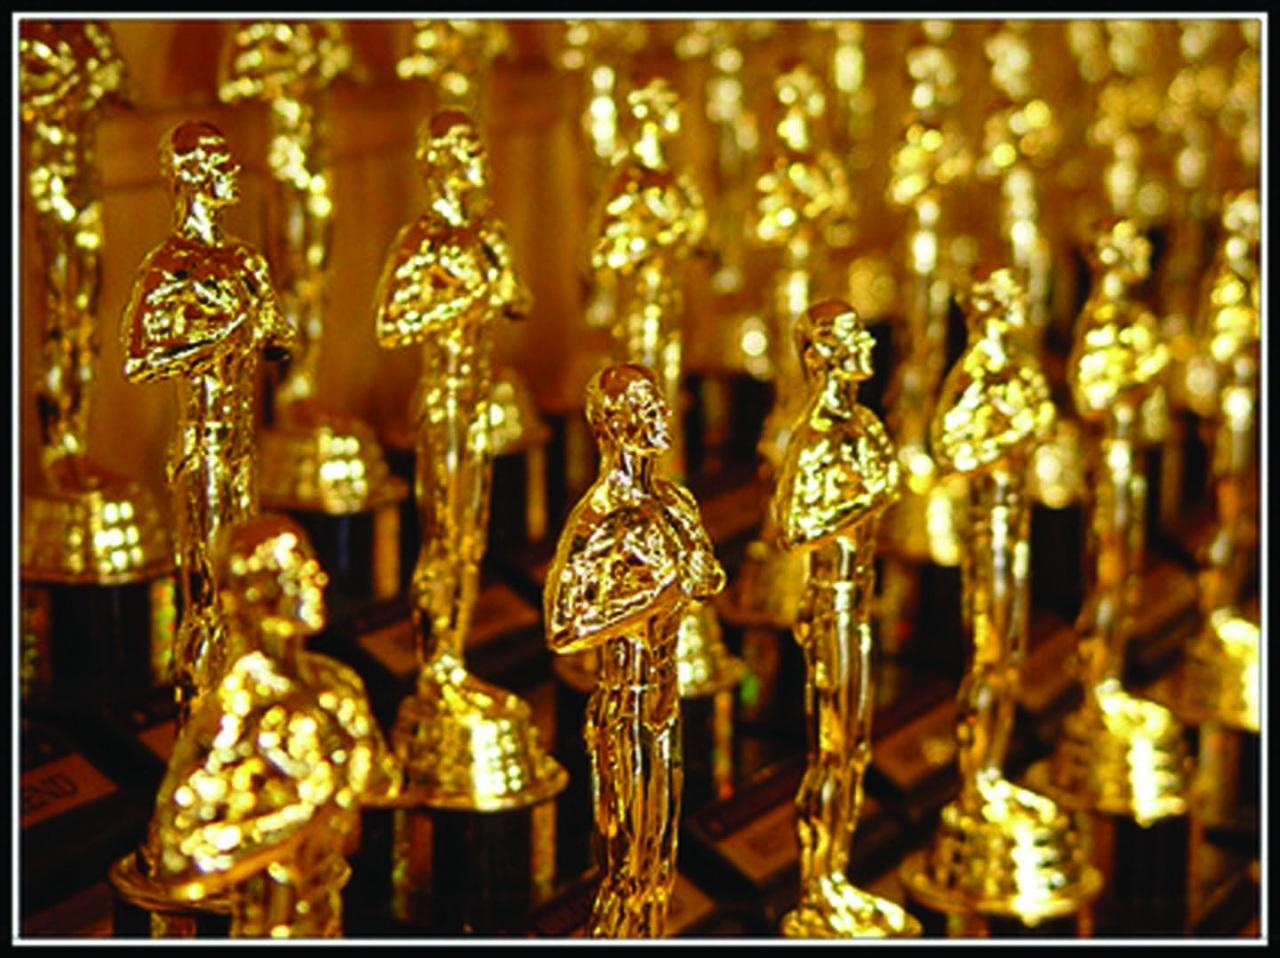 Commissary is once again hosting its Oscar viewing party. (Photo: Academy of Motion Picture Arts and Sciences)